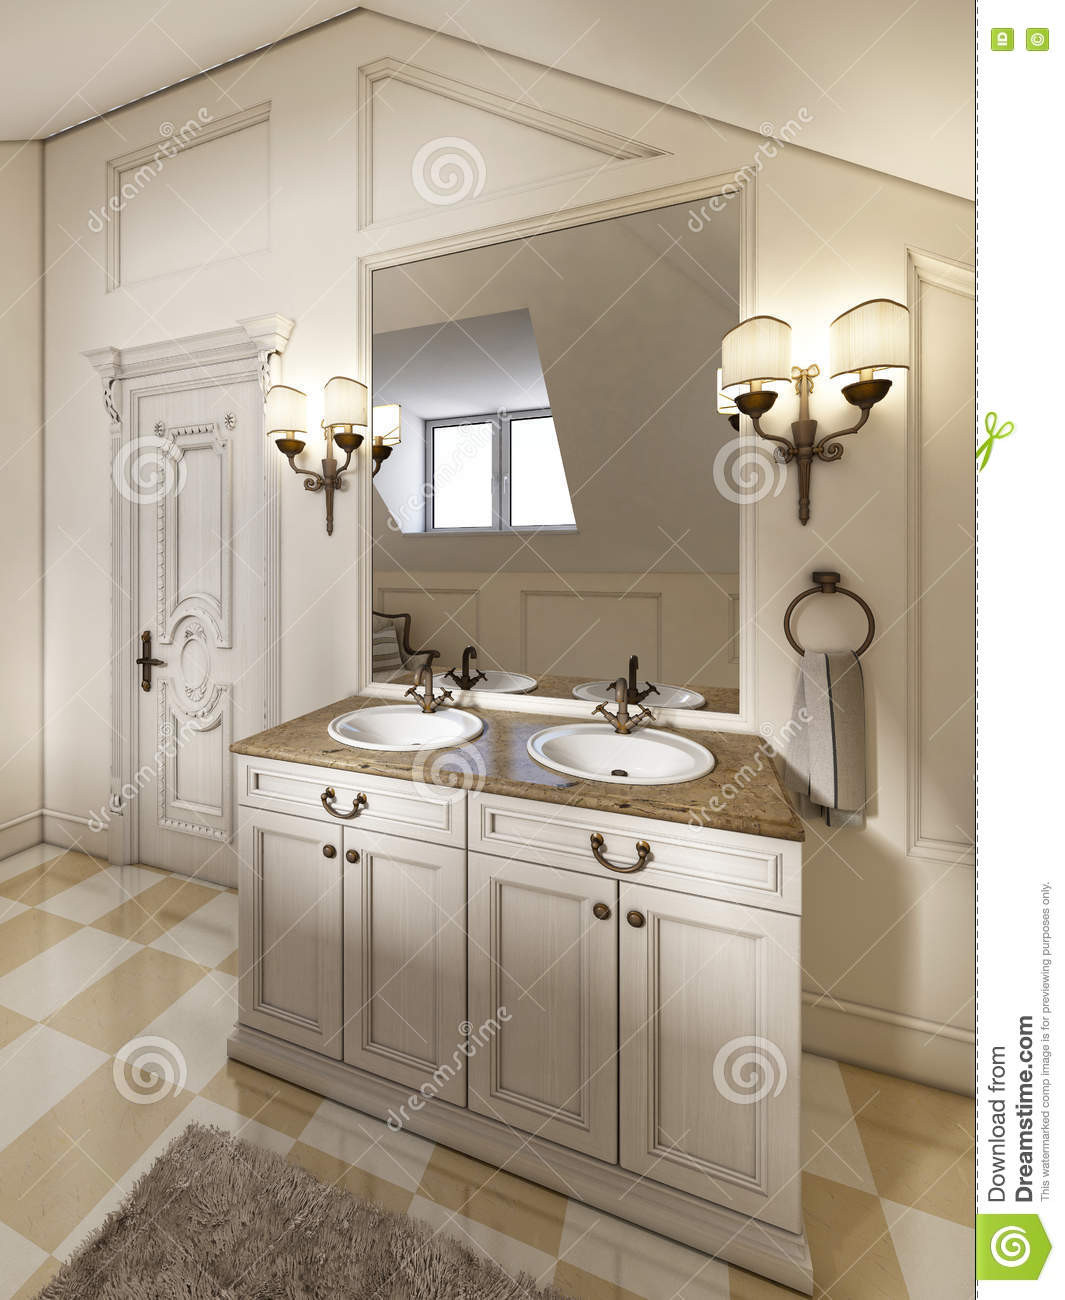 Mirrors Over Bathroom Sinks
 White Bath Sink With Mirror And Sconces The Sides